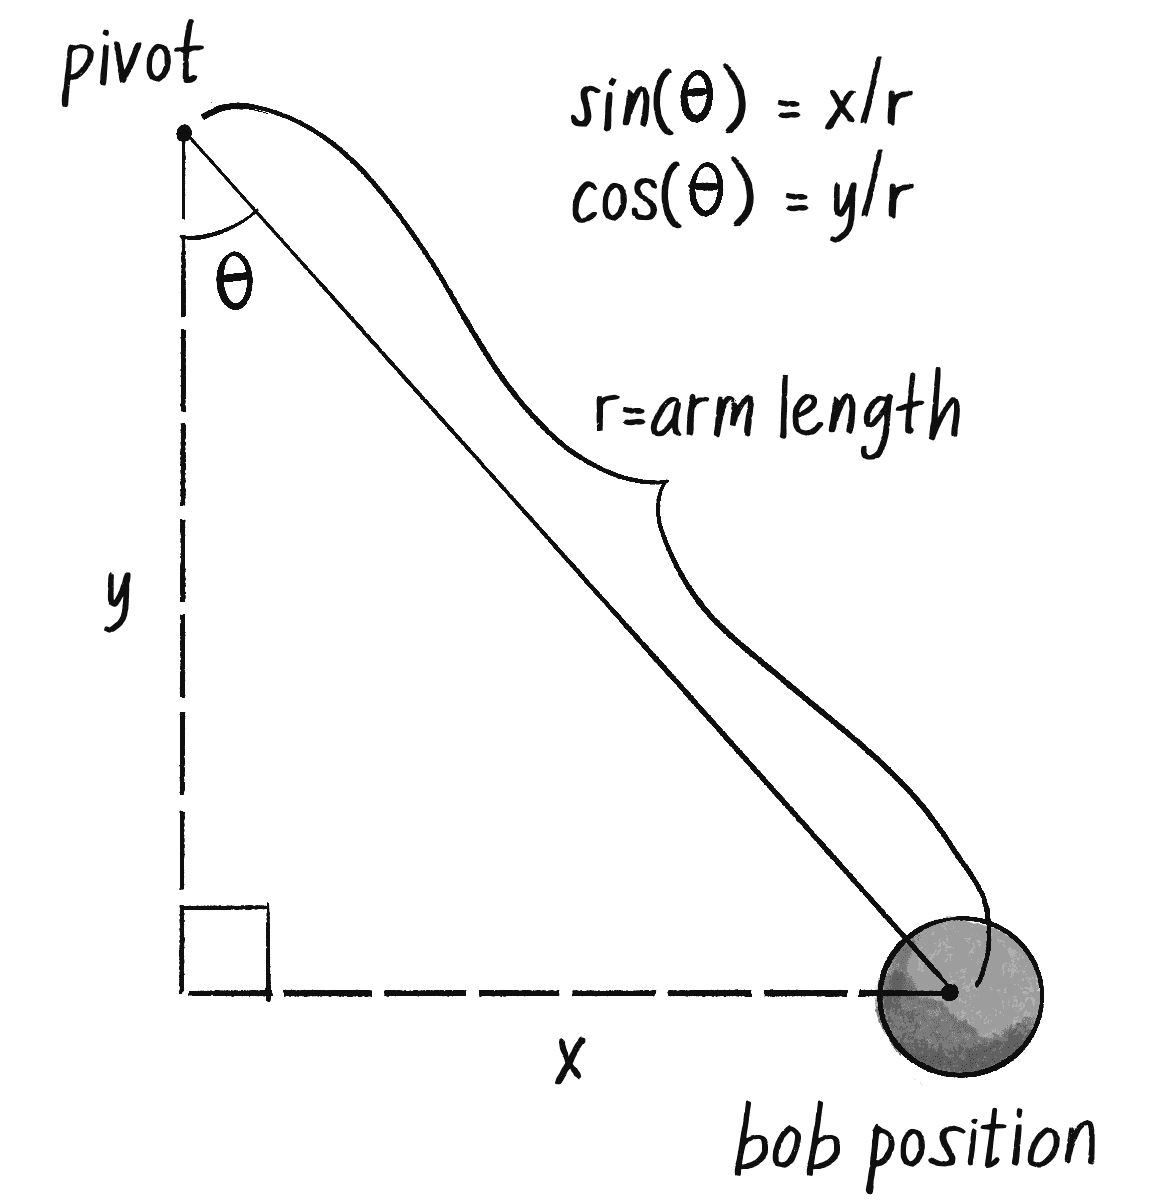 Figure 3.19: A diagram showing the bob position relative to the pivot in polar and Cartesian coordinates